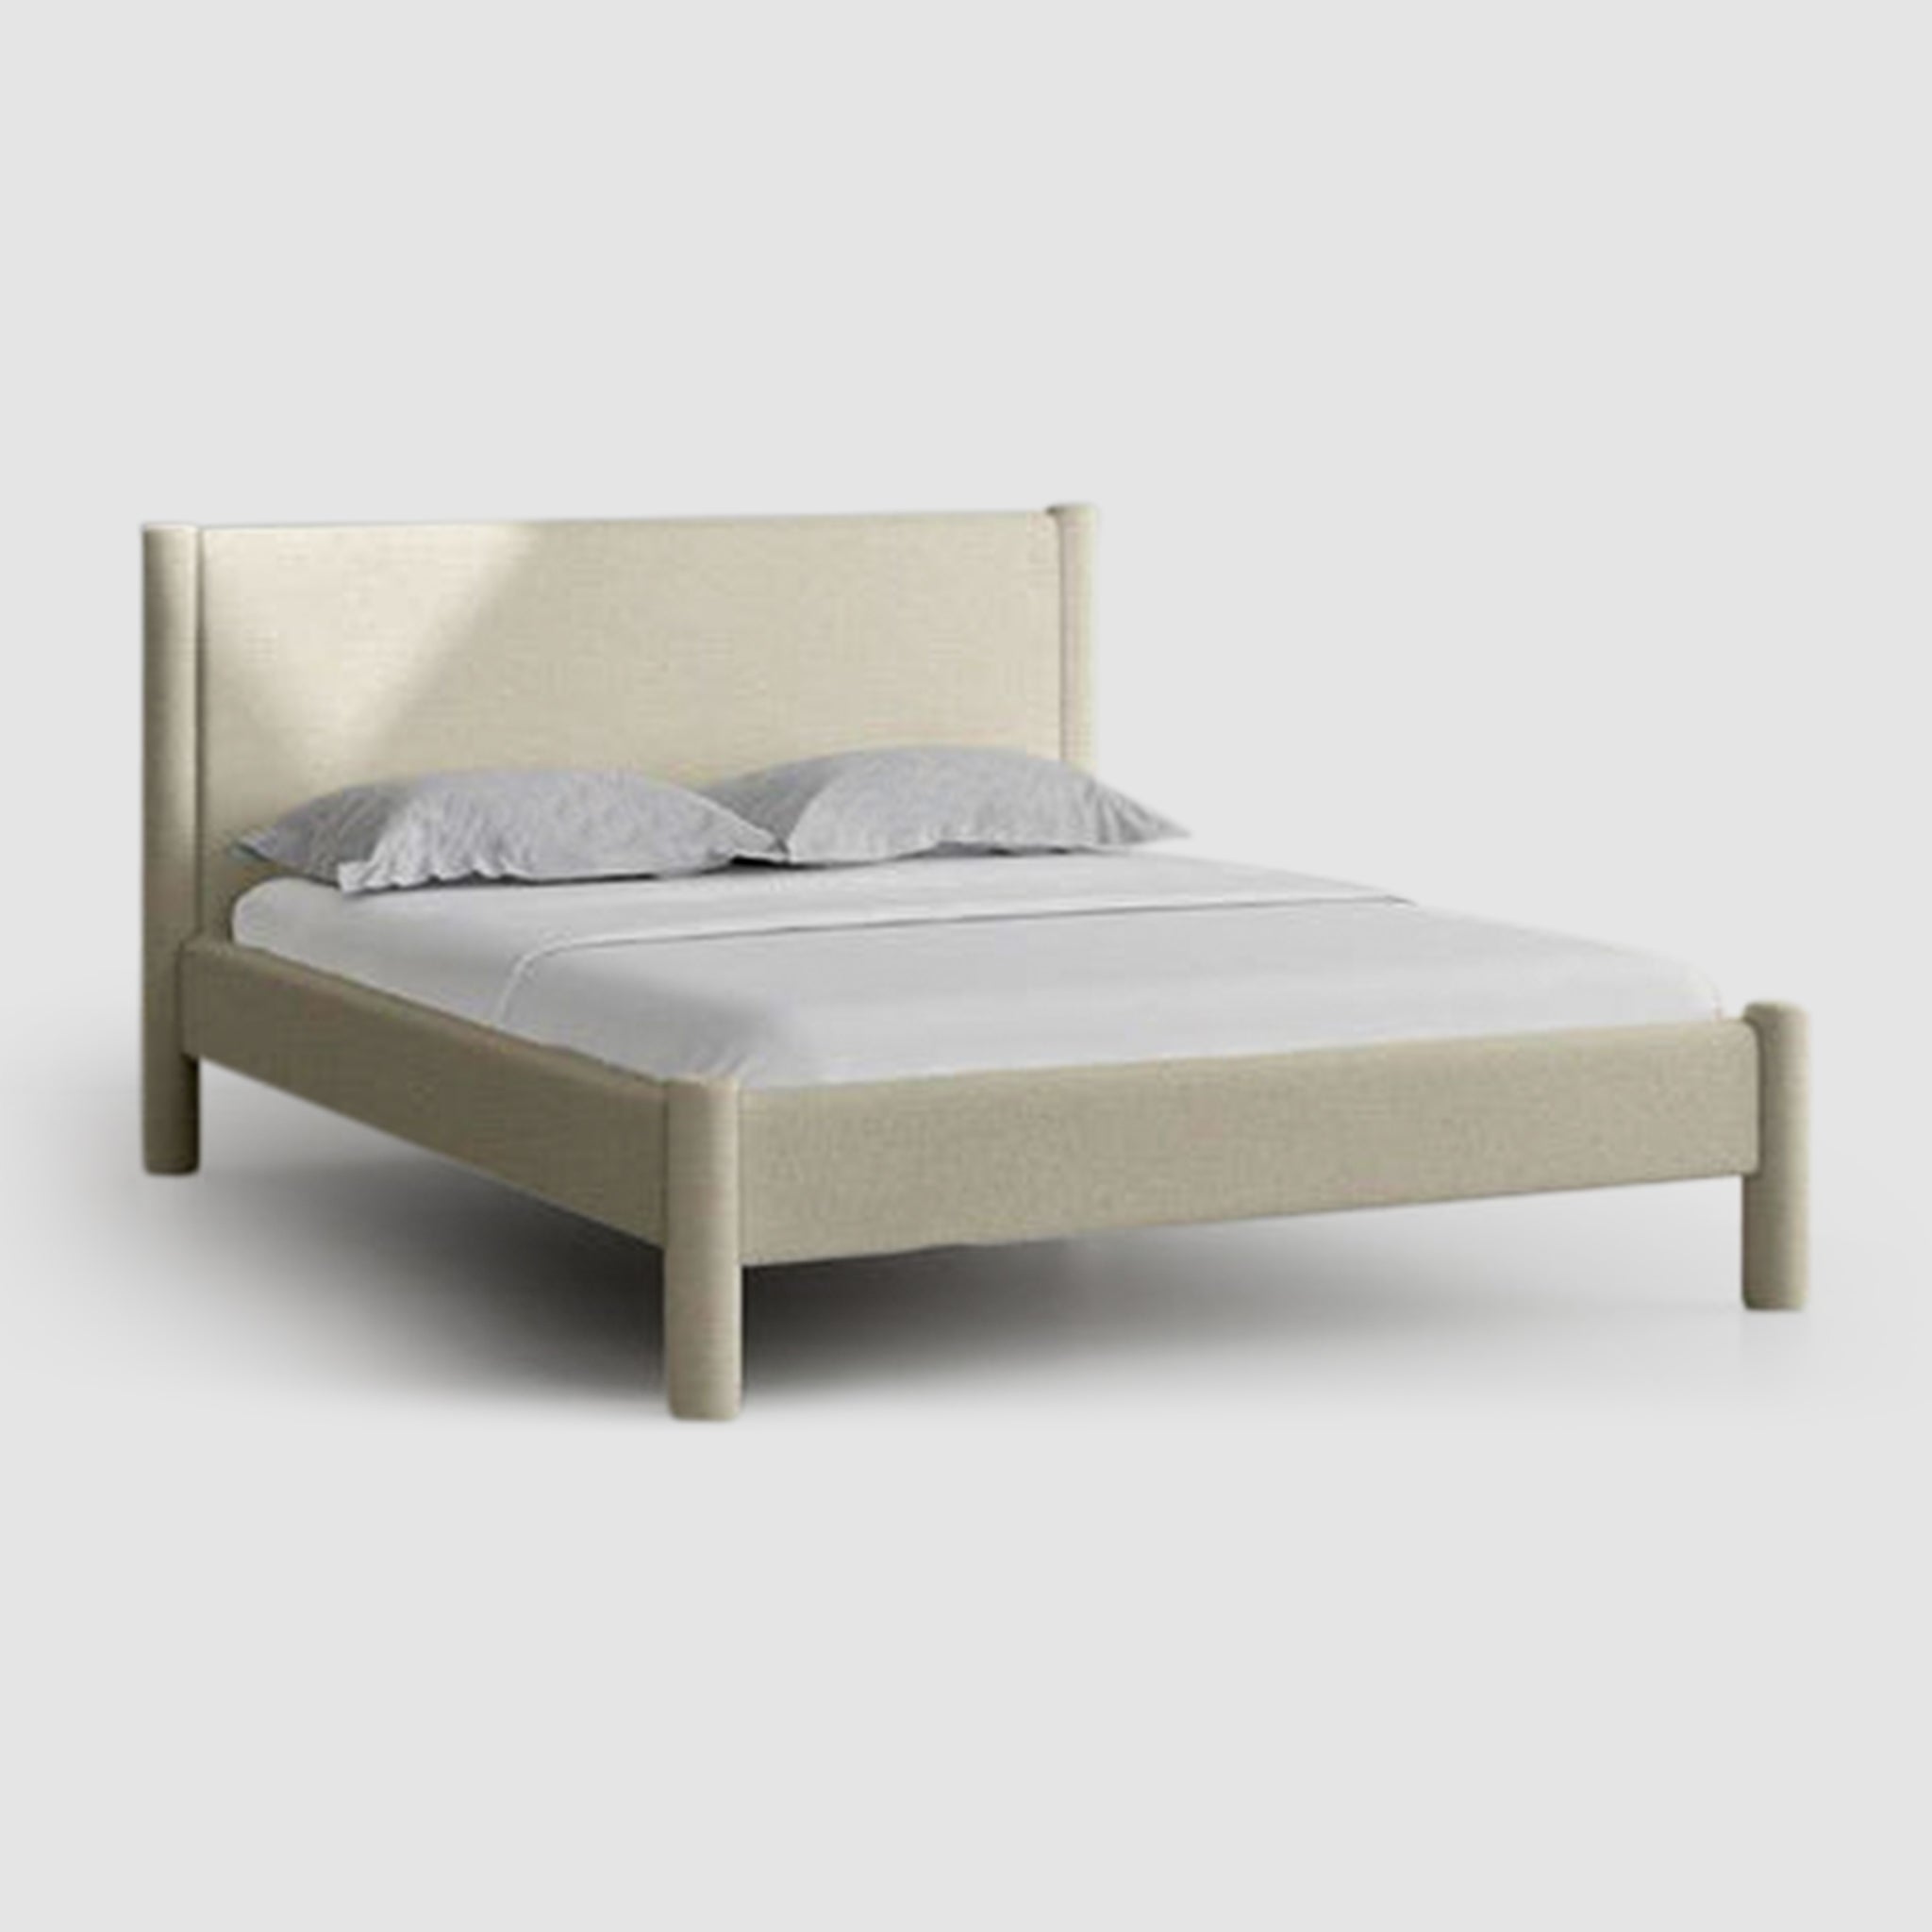 The Carrie Bed featuring a modern design and sturdy wood frame.